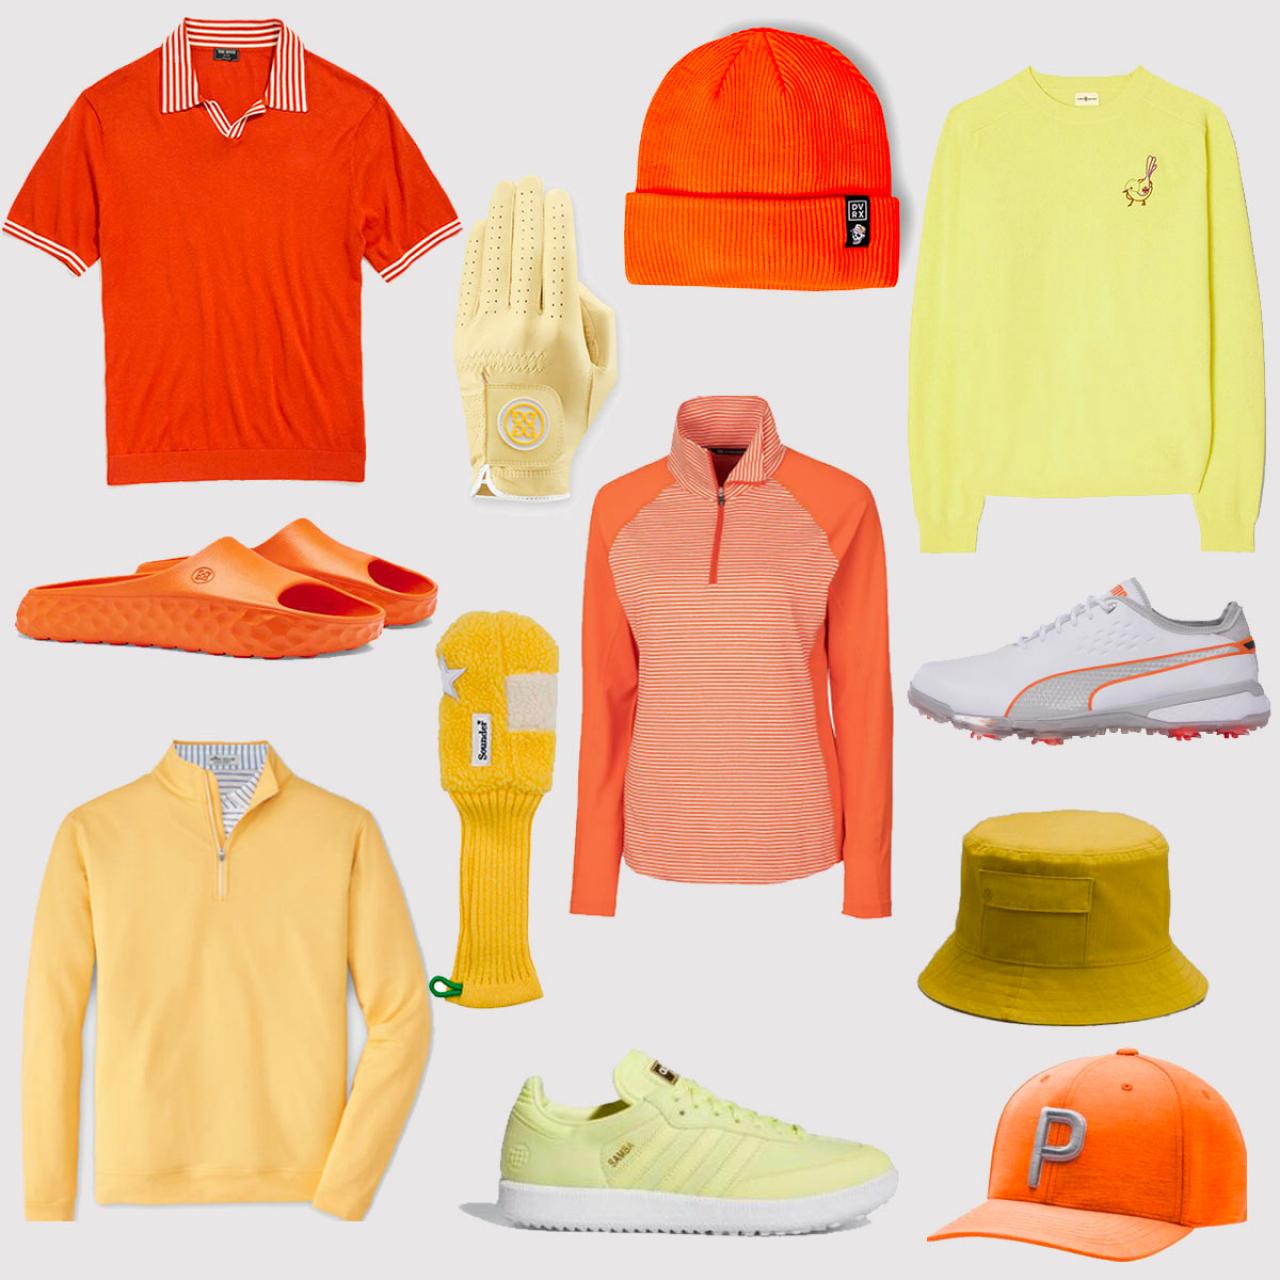 Wear these colors to energize your golf game this fall | Golf Equipment:  Clubs, Balls, Bags | Golf Digest